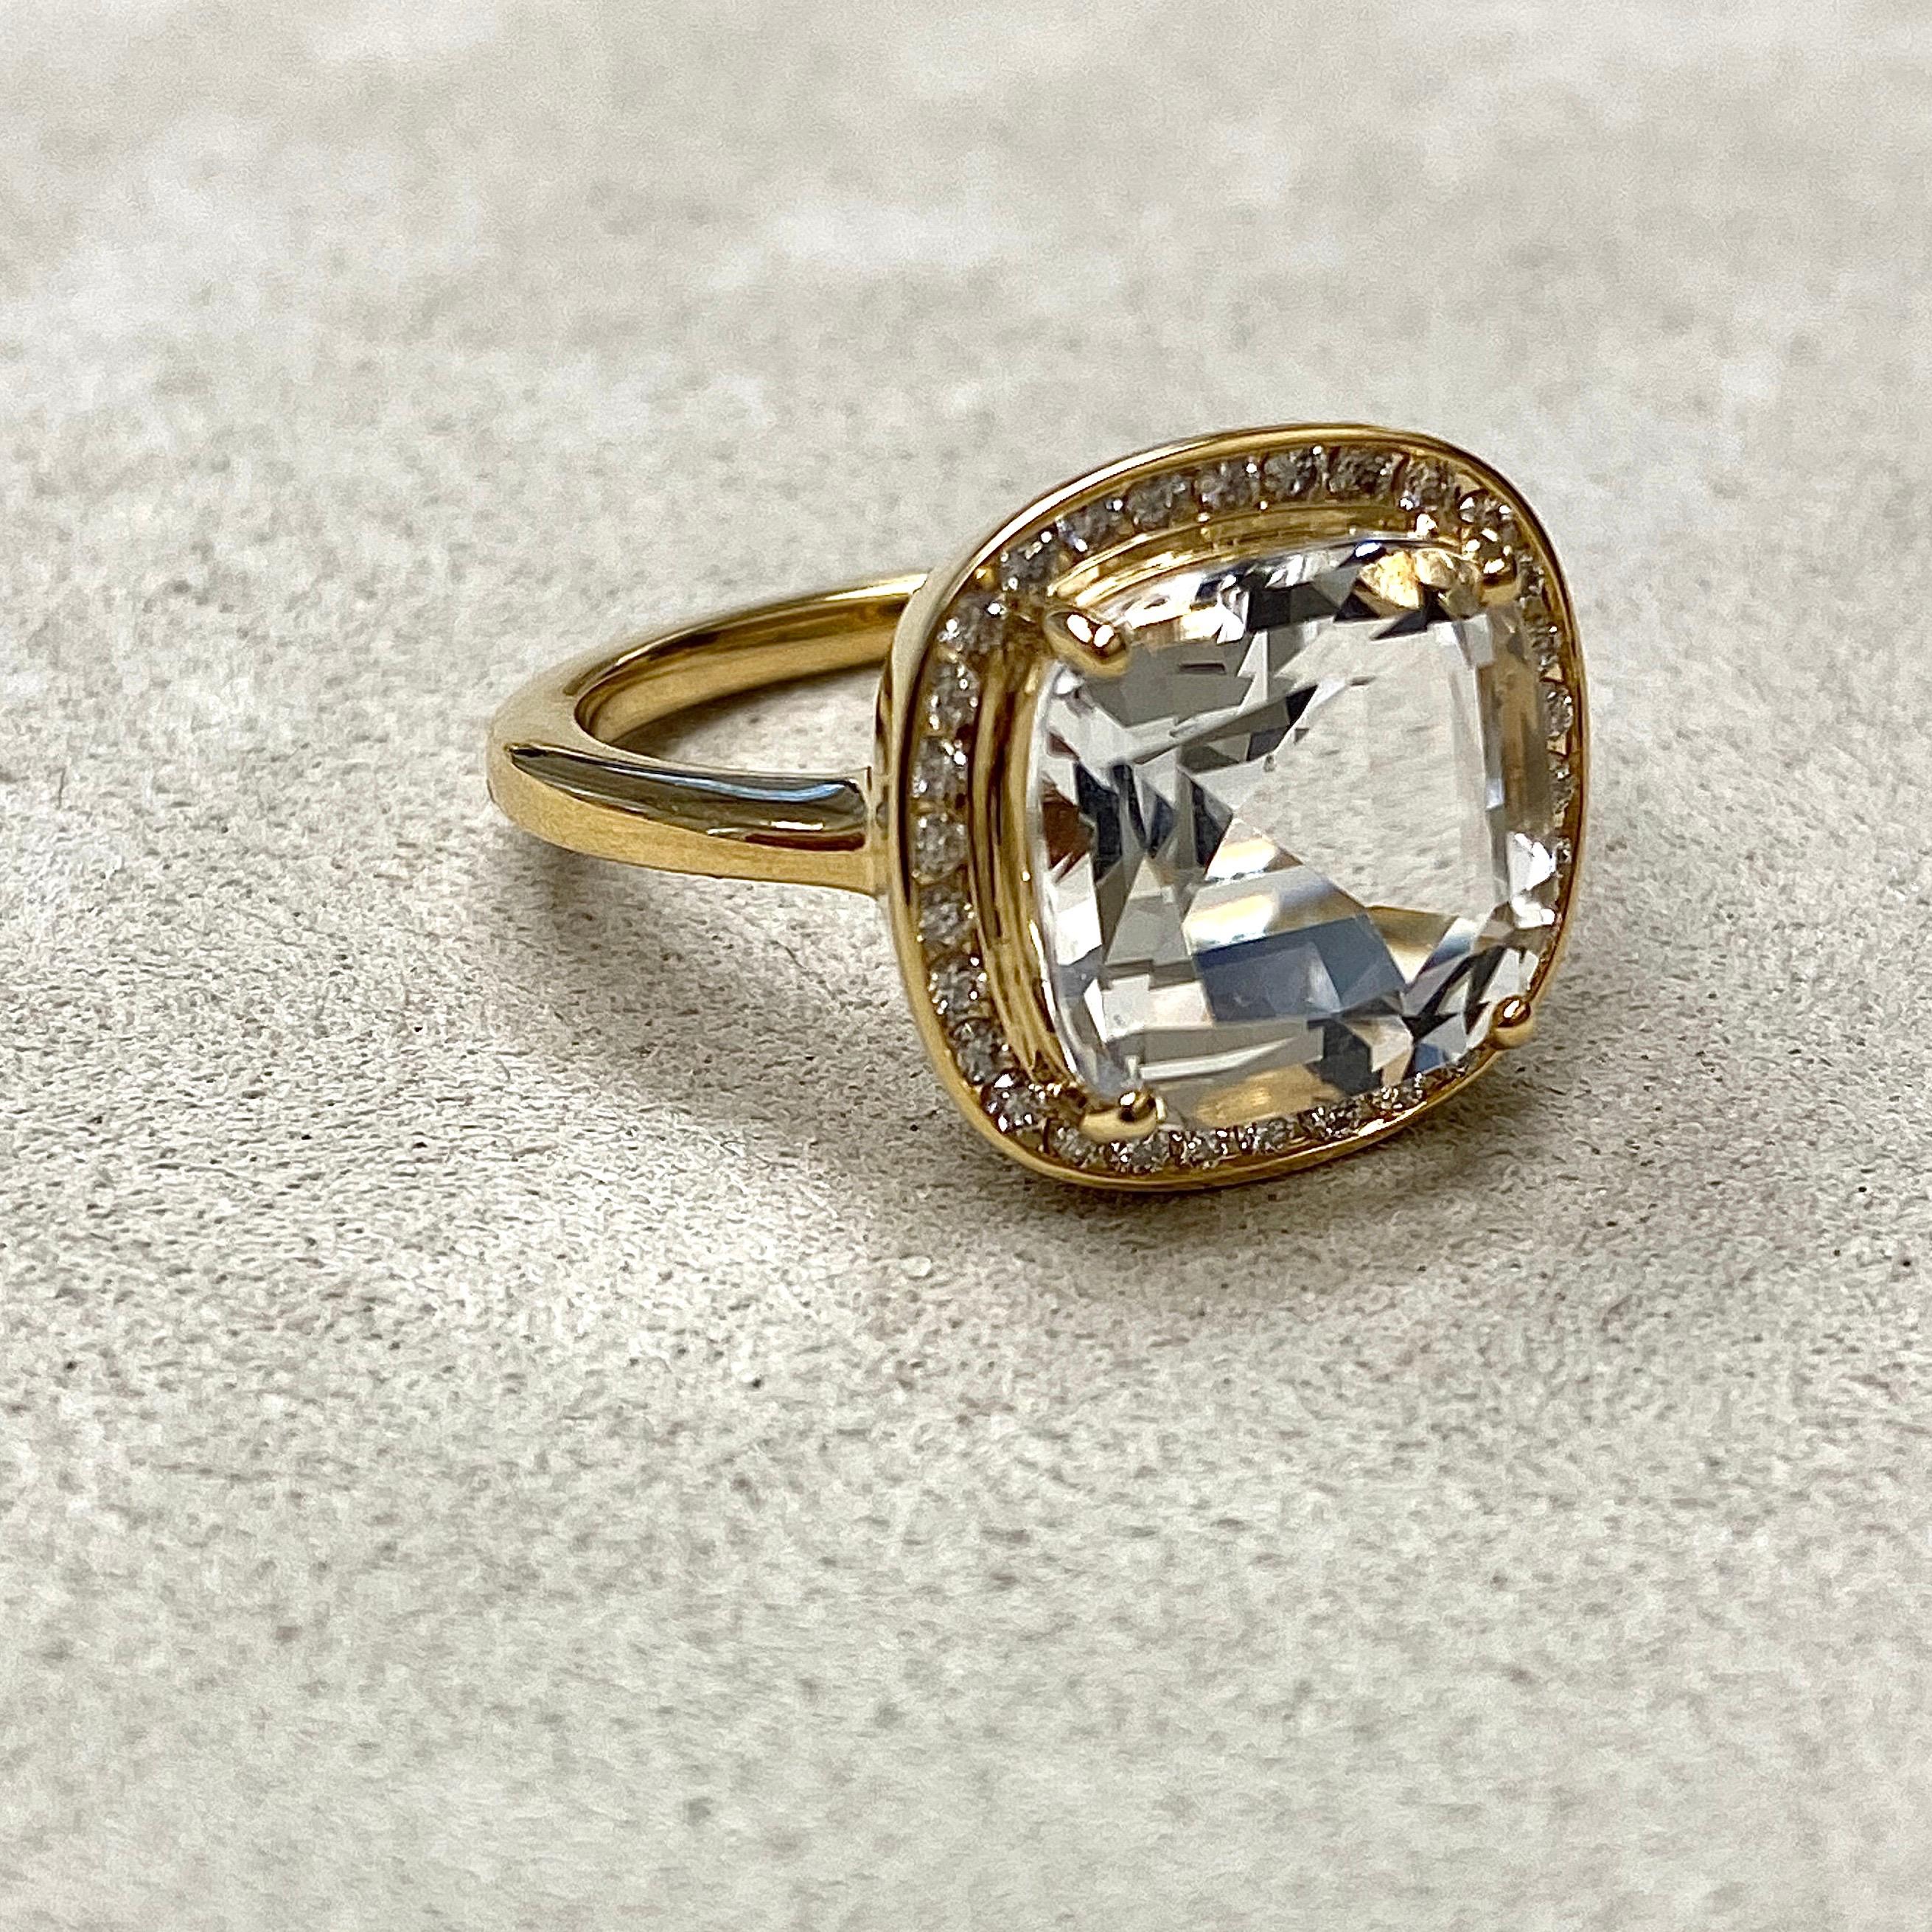 Created in 18kyg
Rock Crystal 4 cts approx
Vintage cushion-cut natural rock crystal
Diamonds 0.20 ct approx
Ring size US 6.5
Limited edition

About the Designers ~ Dharmesh & Namrata

Drawing inspiration from little things, Dharmesh & Namrata